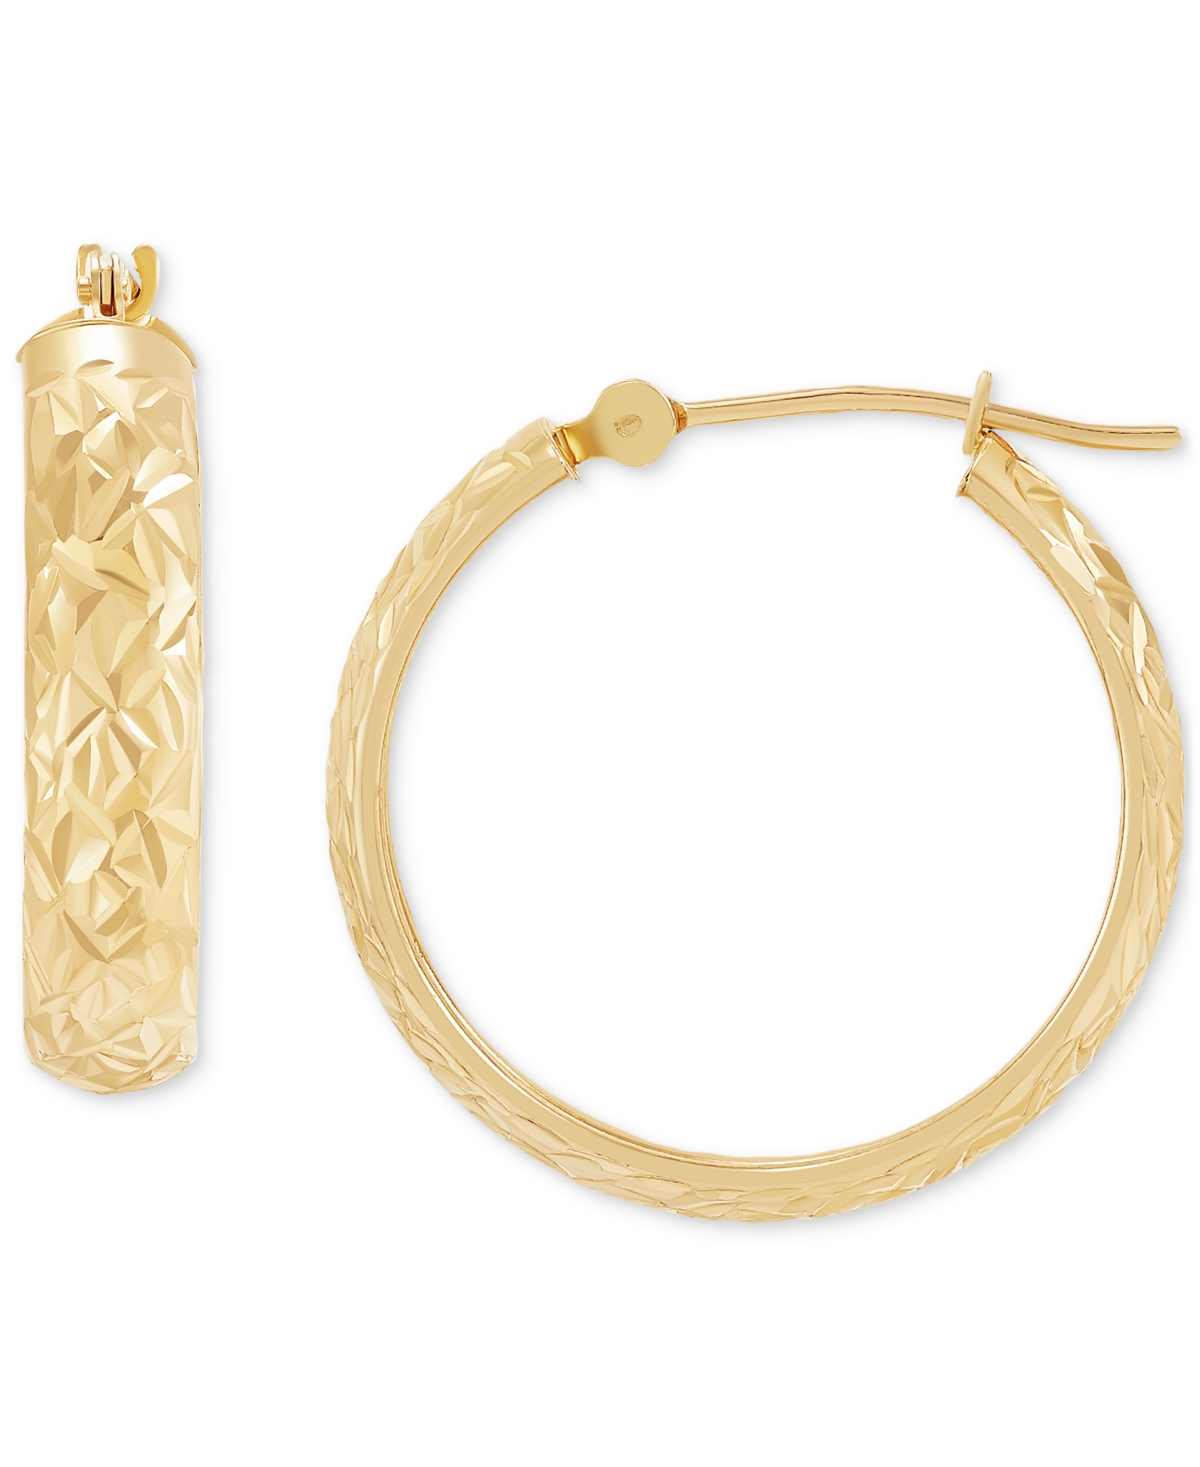 Macy's Textured & Polished Small Hoop Earrings In 14k Gold, 20mm In Yellow Gold